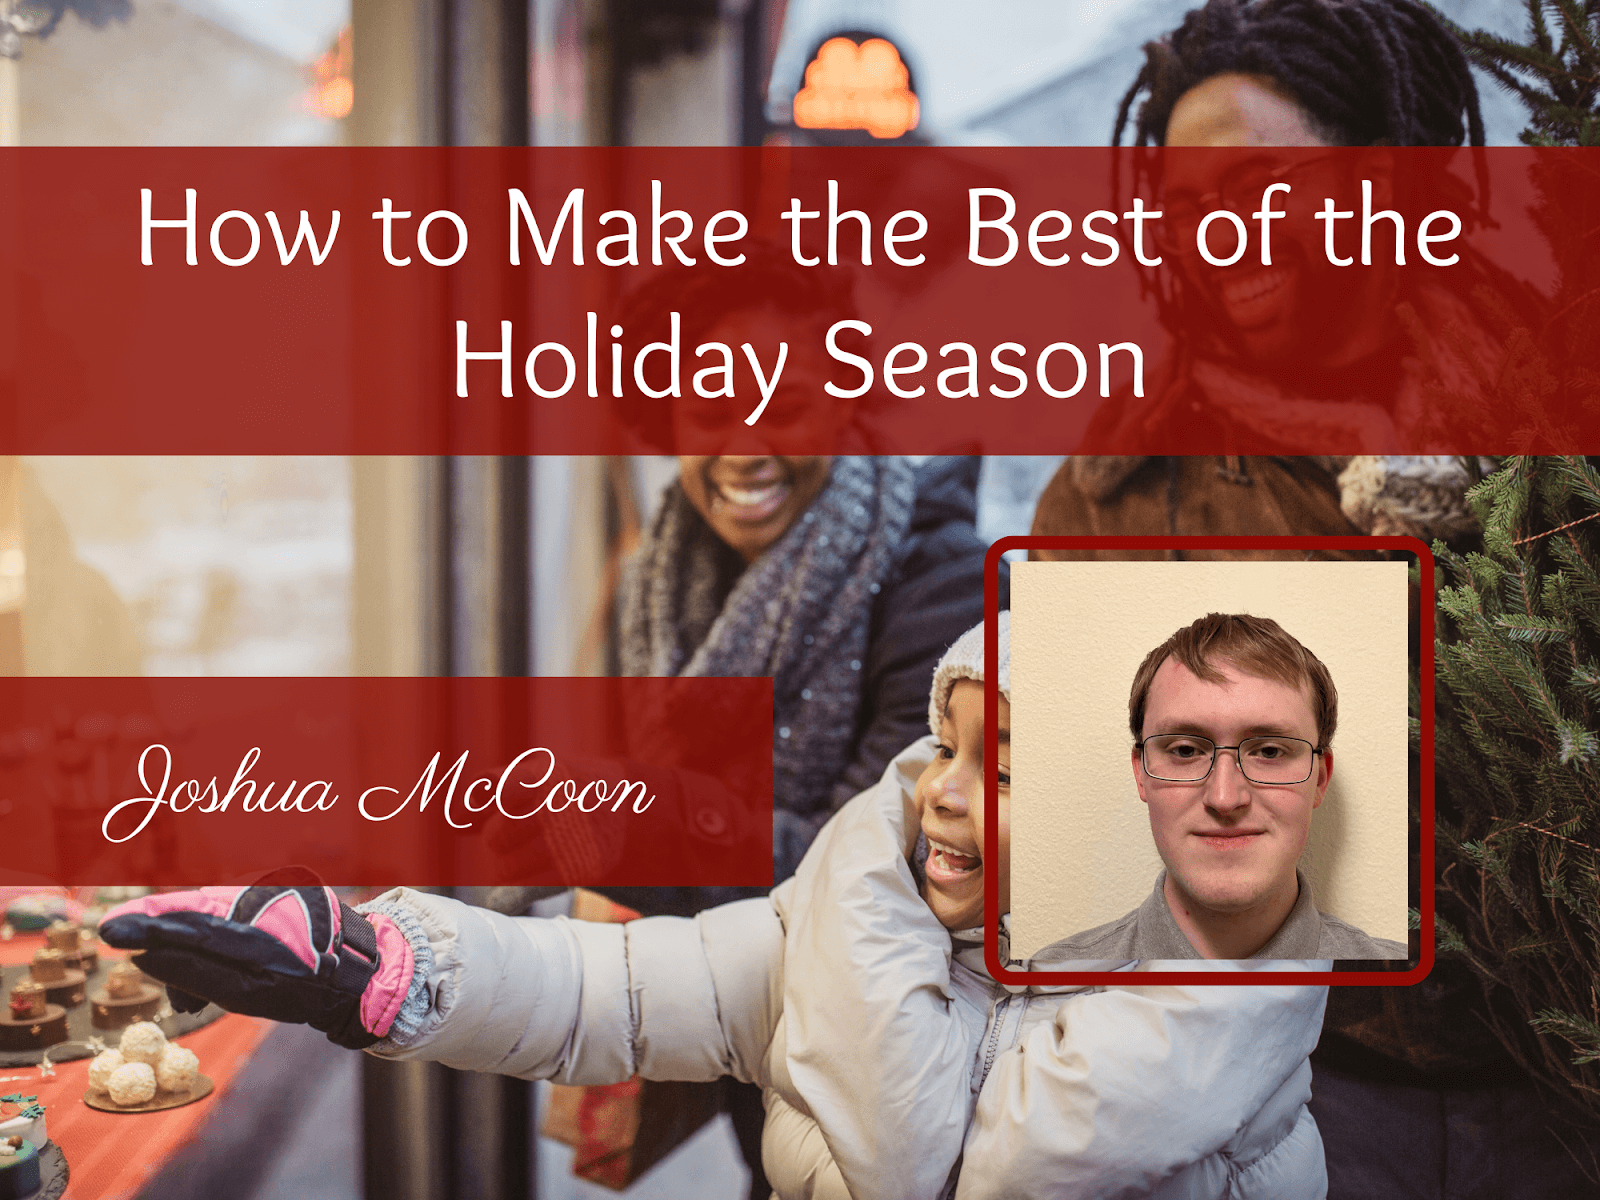 How to Make the Best of the Holiday Season